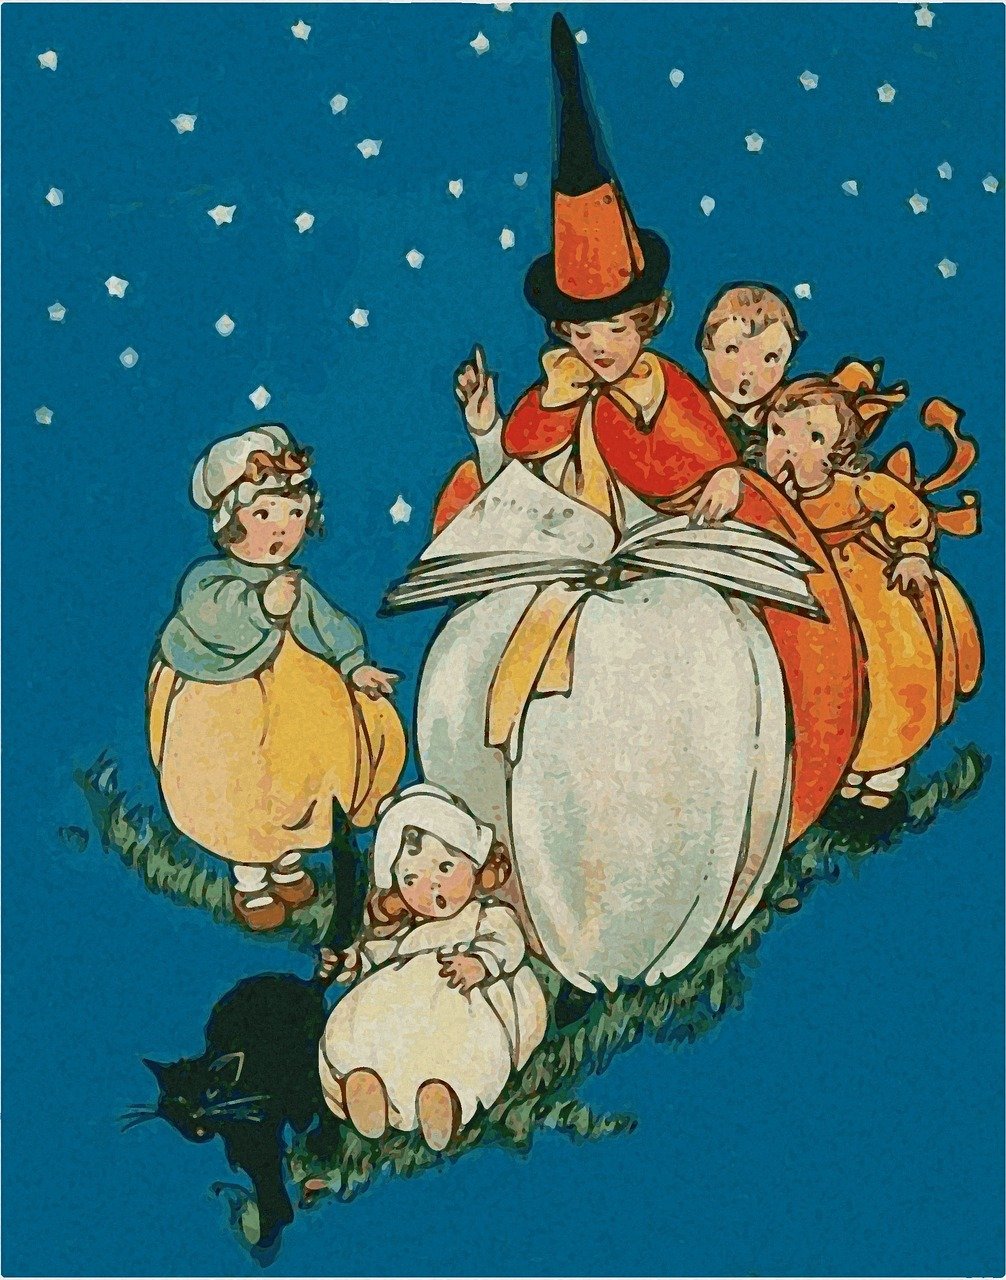 a group of children sitting on top of a pile of books, a storybook illustration, by Jessie Willcox Smith, shutterstock, folk art, holding a jack - o - lantern, wizard examining eggs, 1 6 x 1 6, coloured woodcut